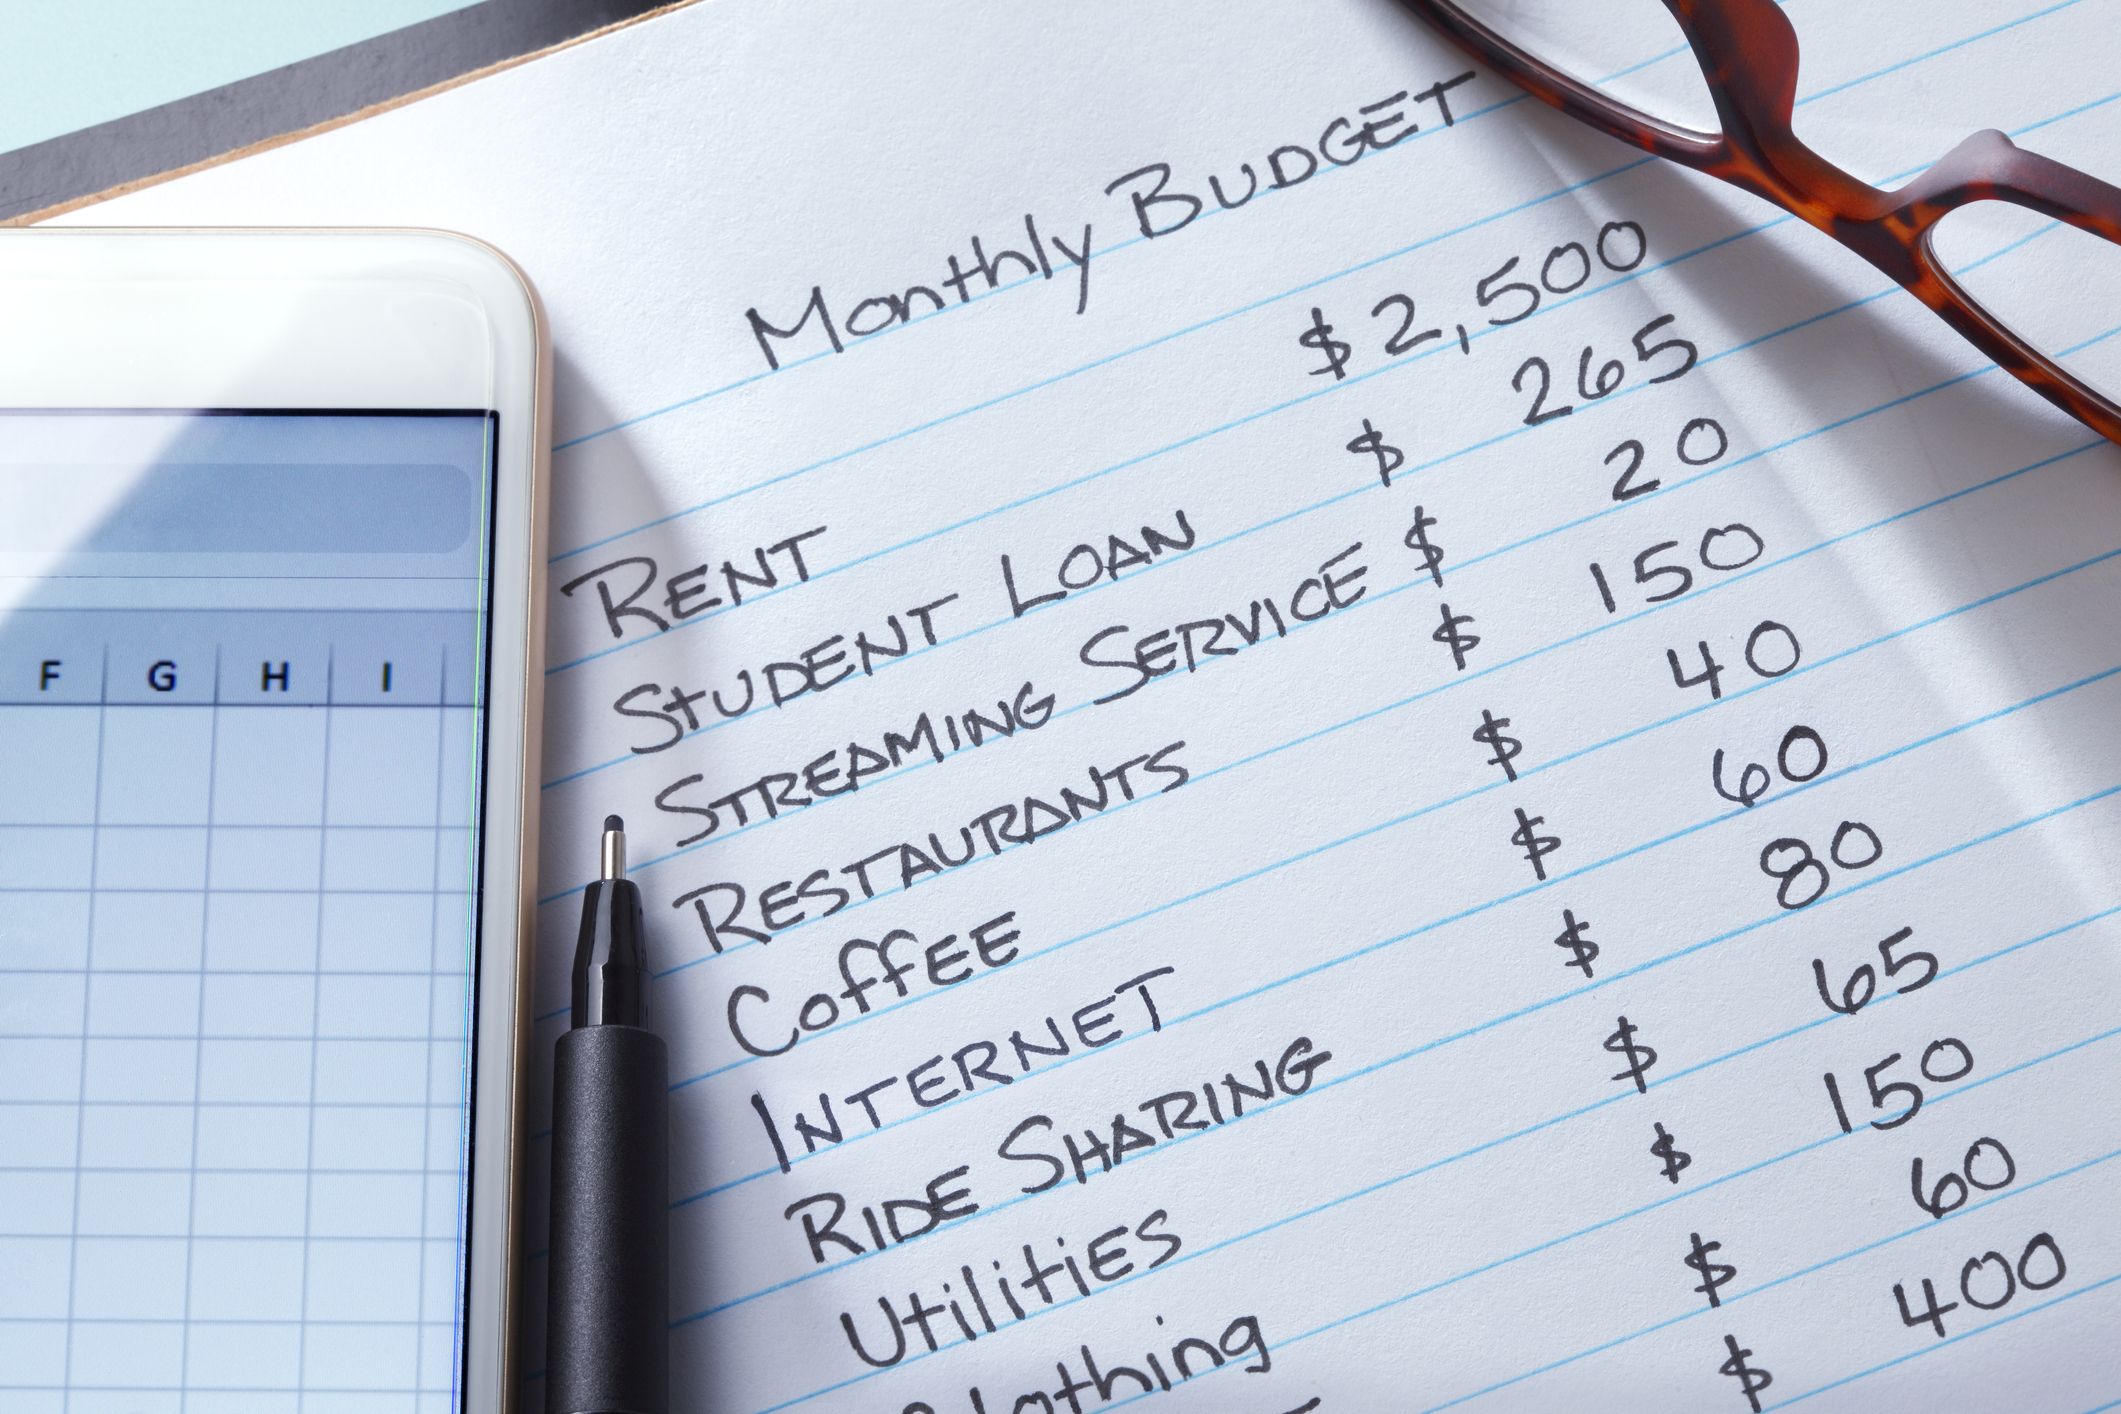 Budgeting 101: A Beginner's Guide to Money Management - SouthEast Bank